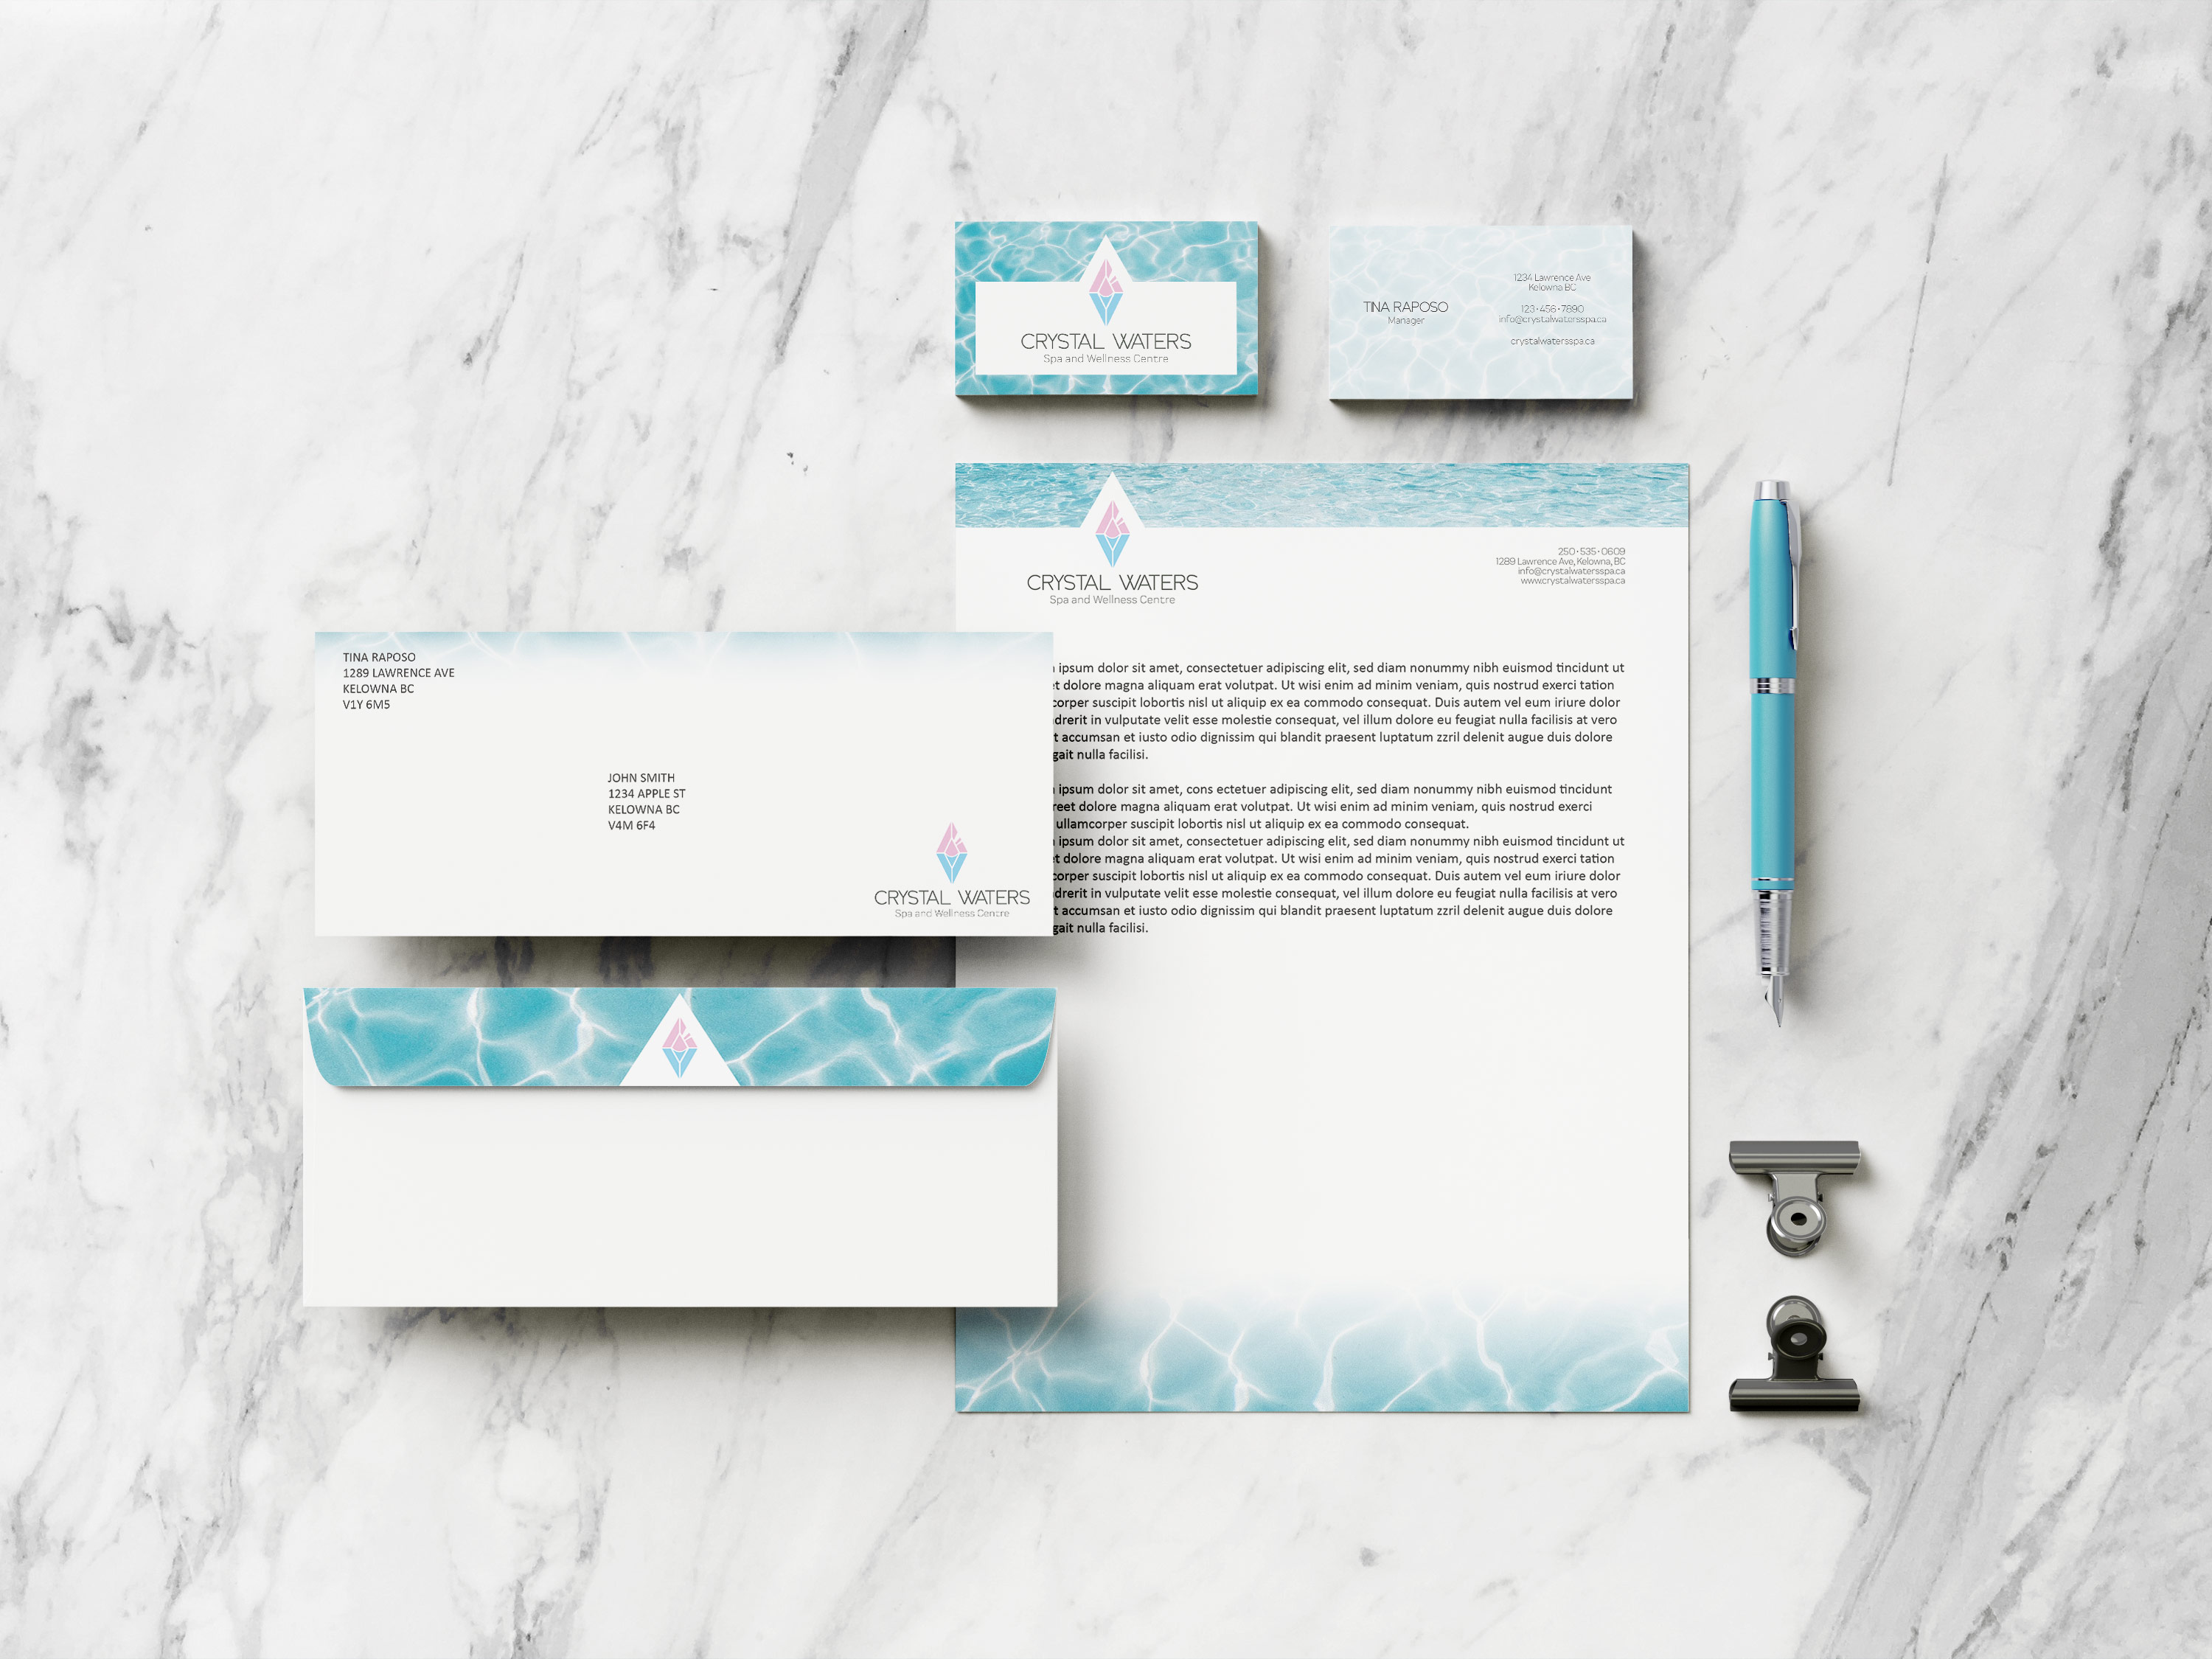 Crystal Waters Spa branding mocked up on a letterhead, envelope and business card